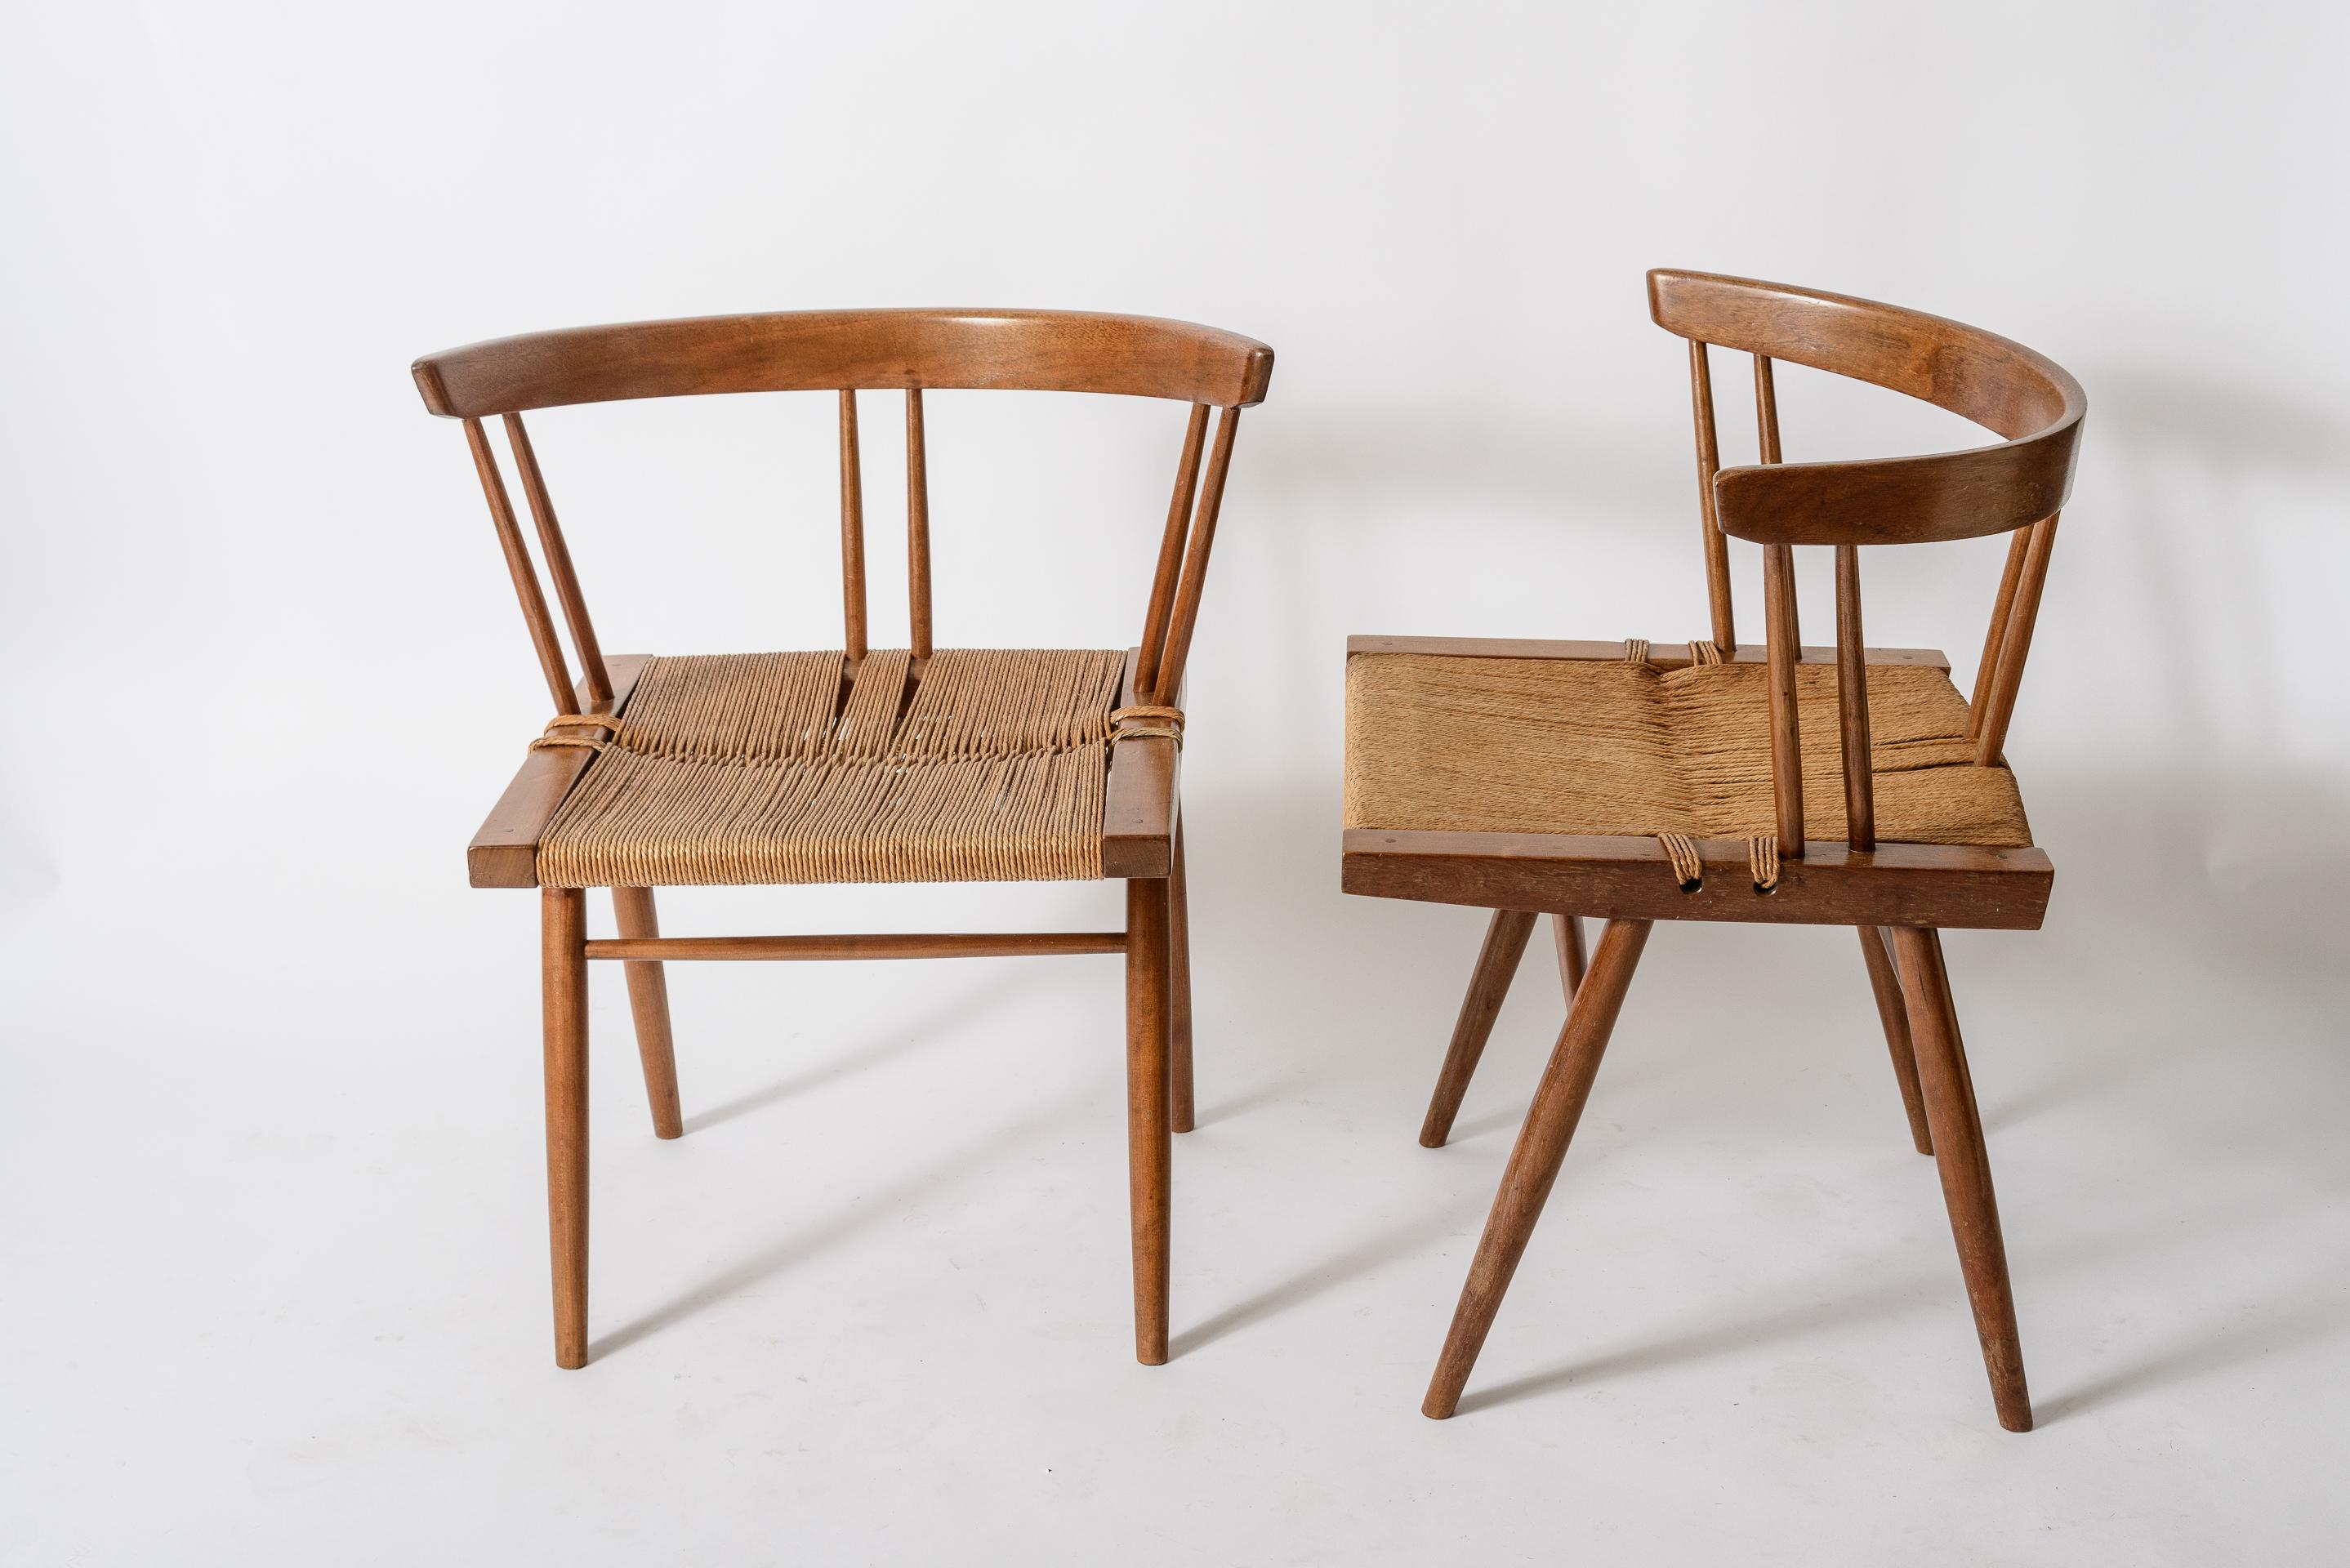 A set of 4 Grass Seat Chairs by George Nakashima.
Nice patina to both wood and grass seats.
Original owners name available